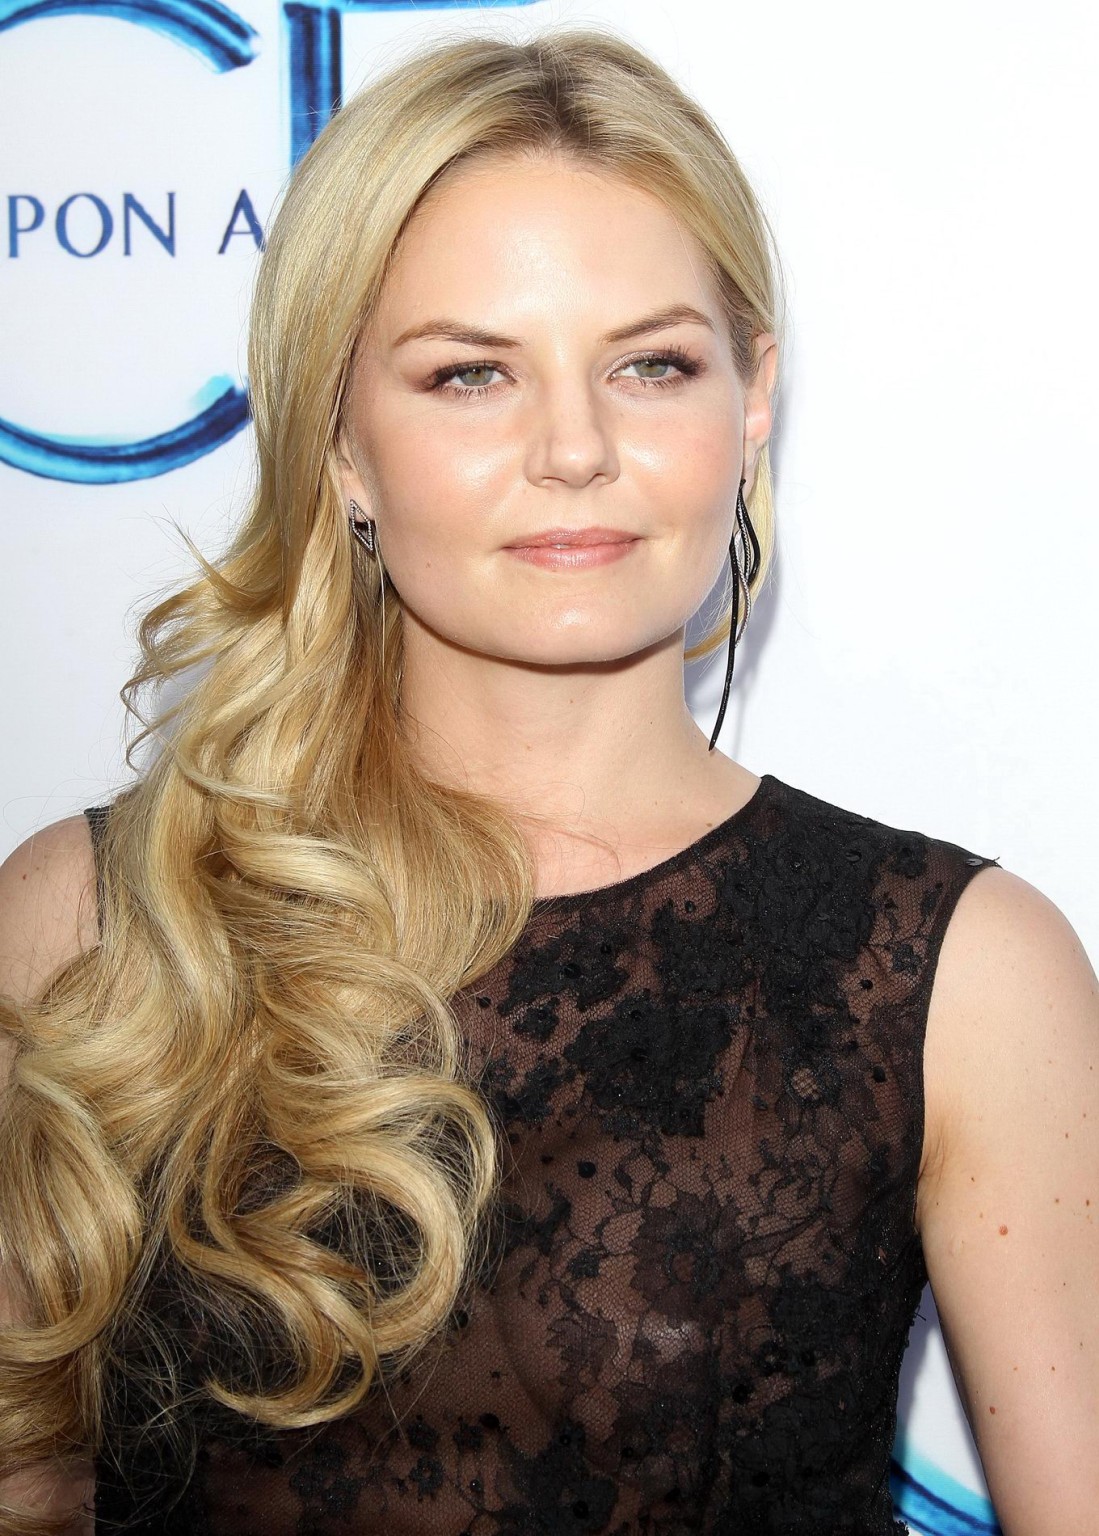 Jennifer Morrison shows off her boobs wearing a see through lace dress at the On #75185177